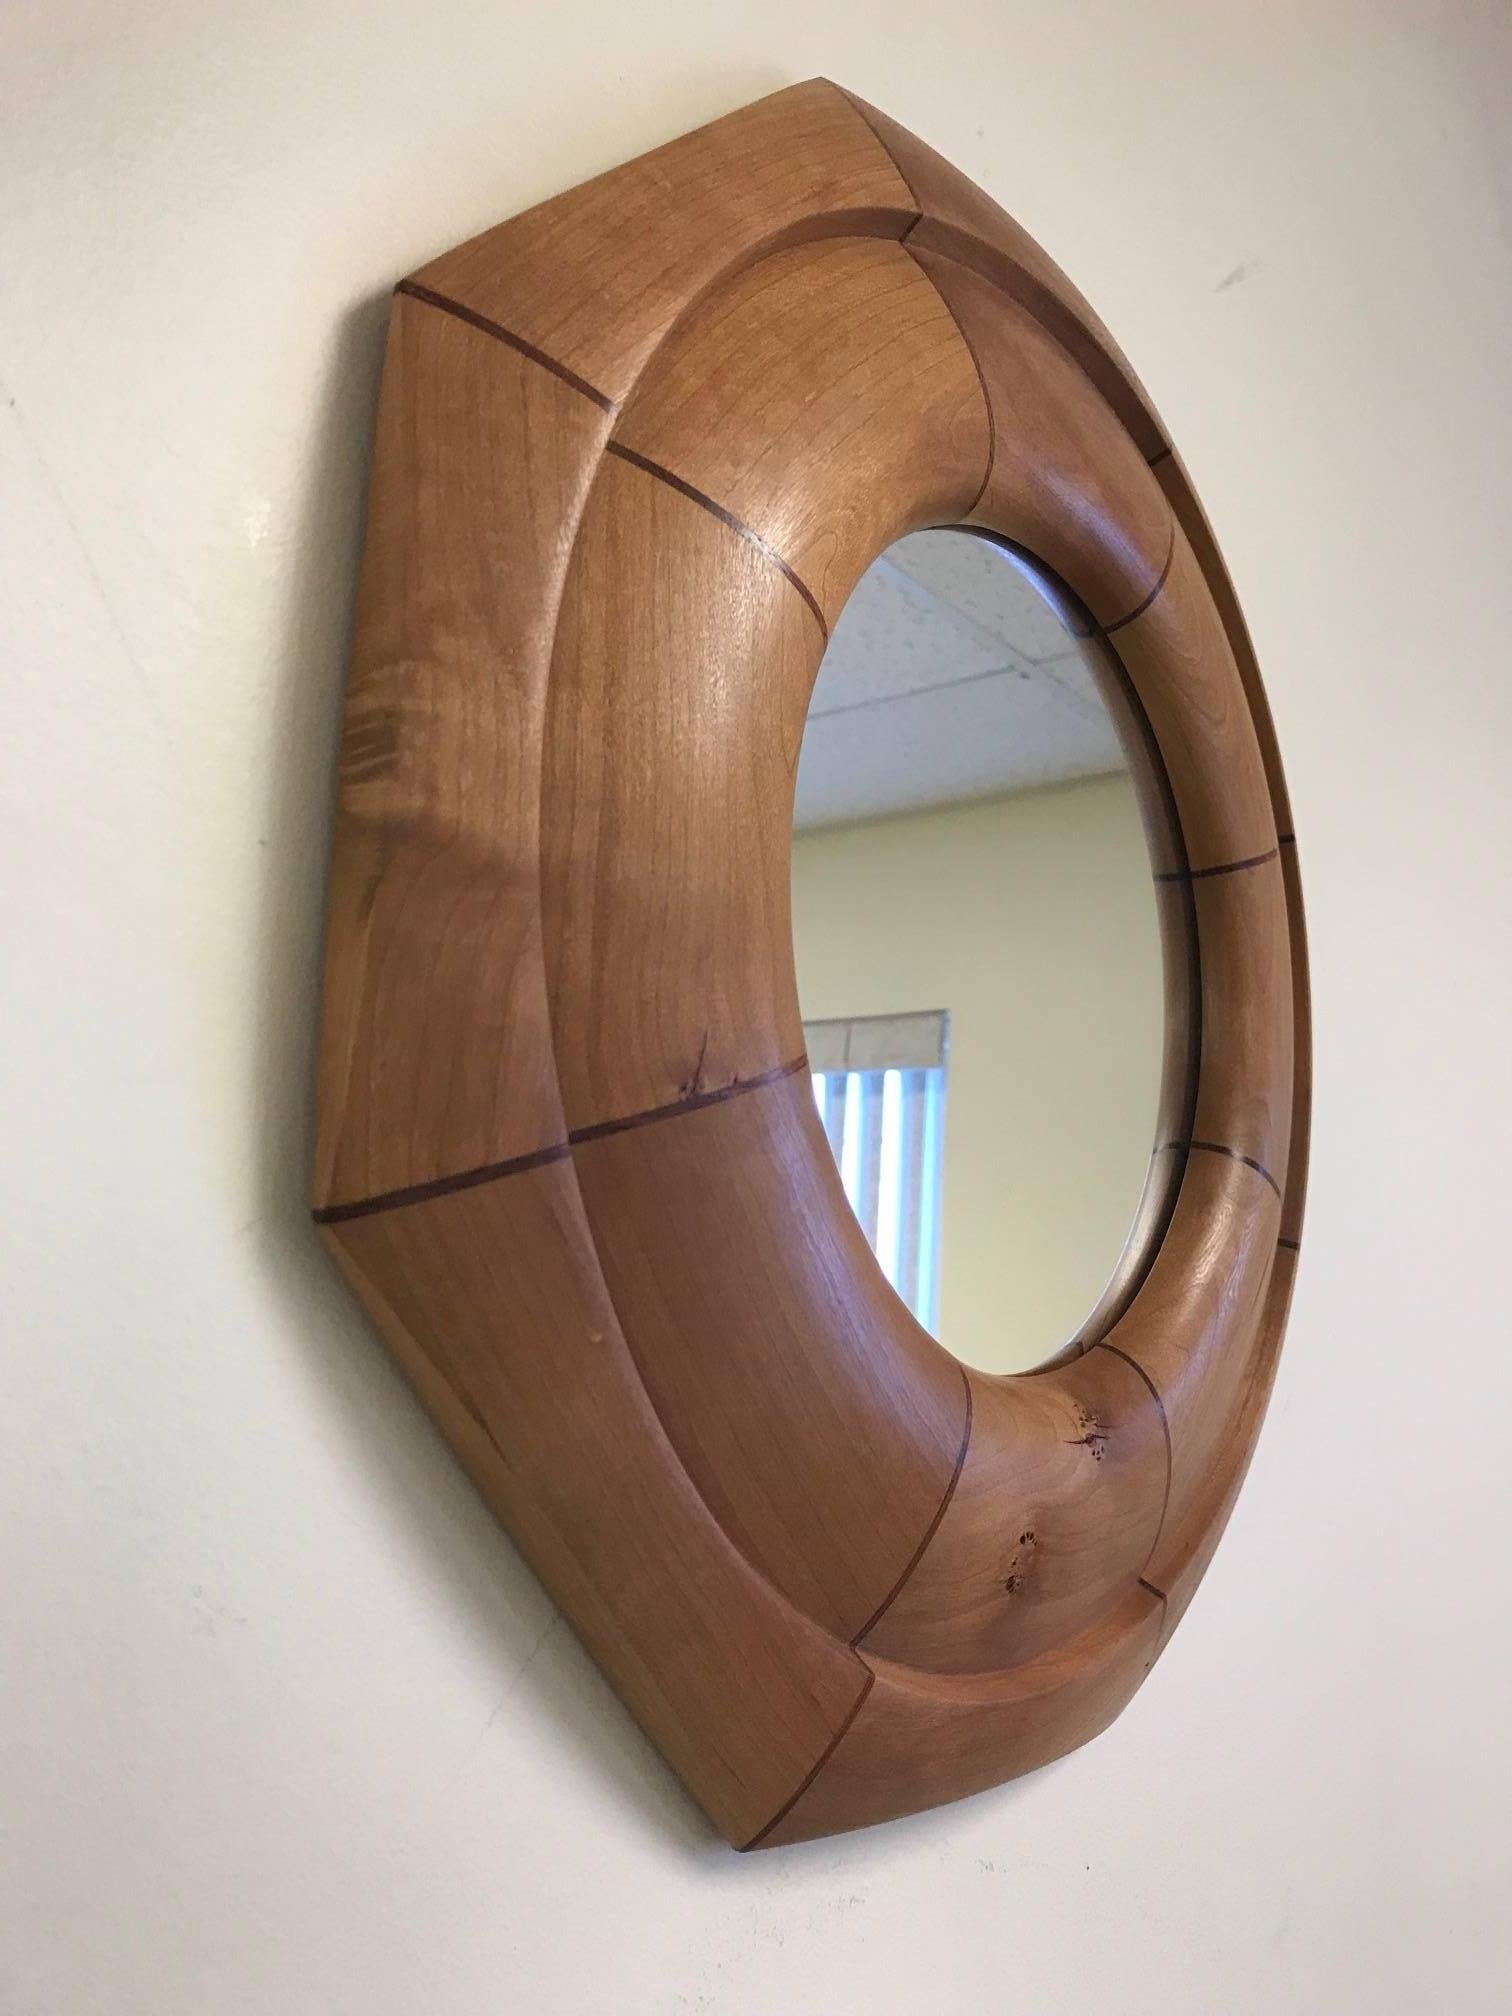 Custom solid cherrywood with walnut inlay octagonal mirror.
The mirror listed is currently available.